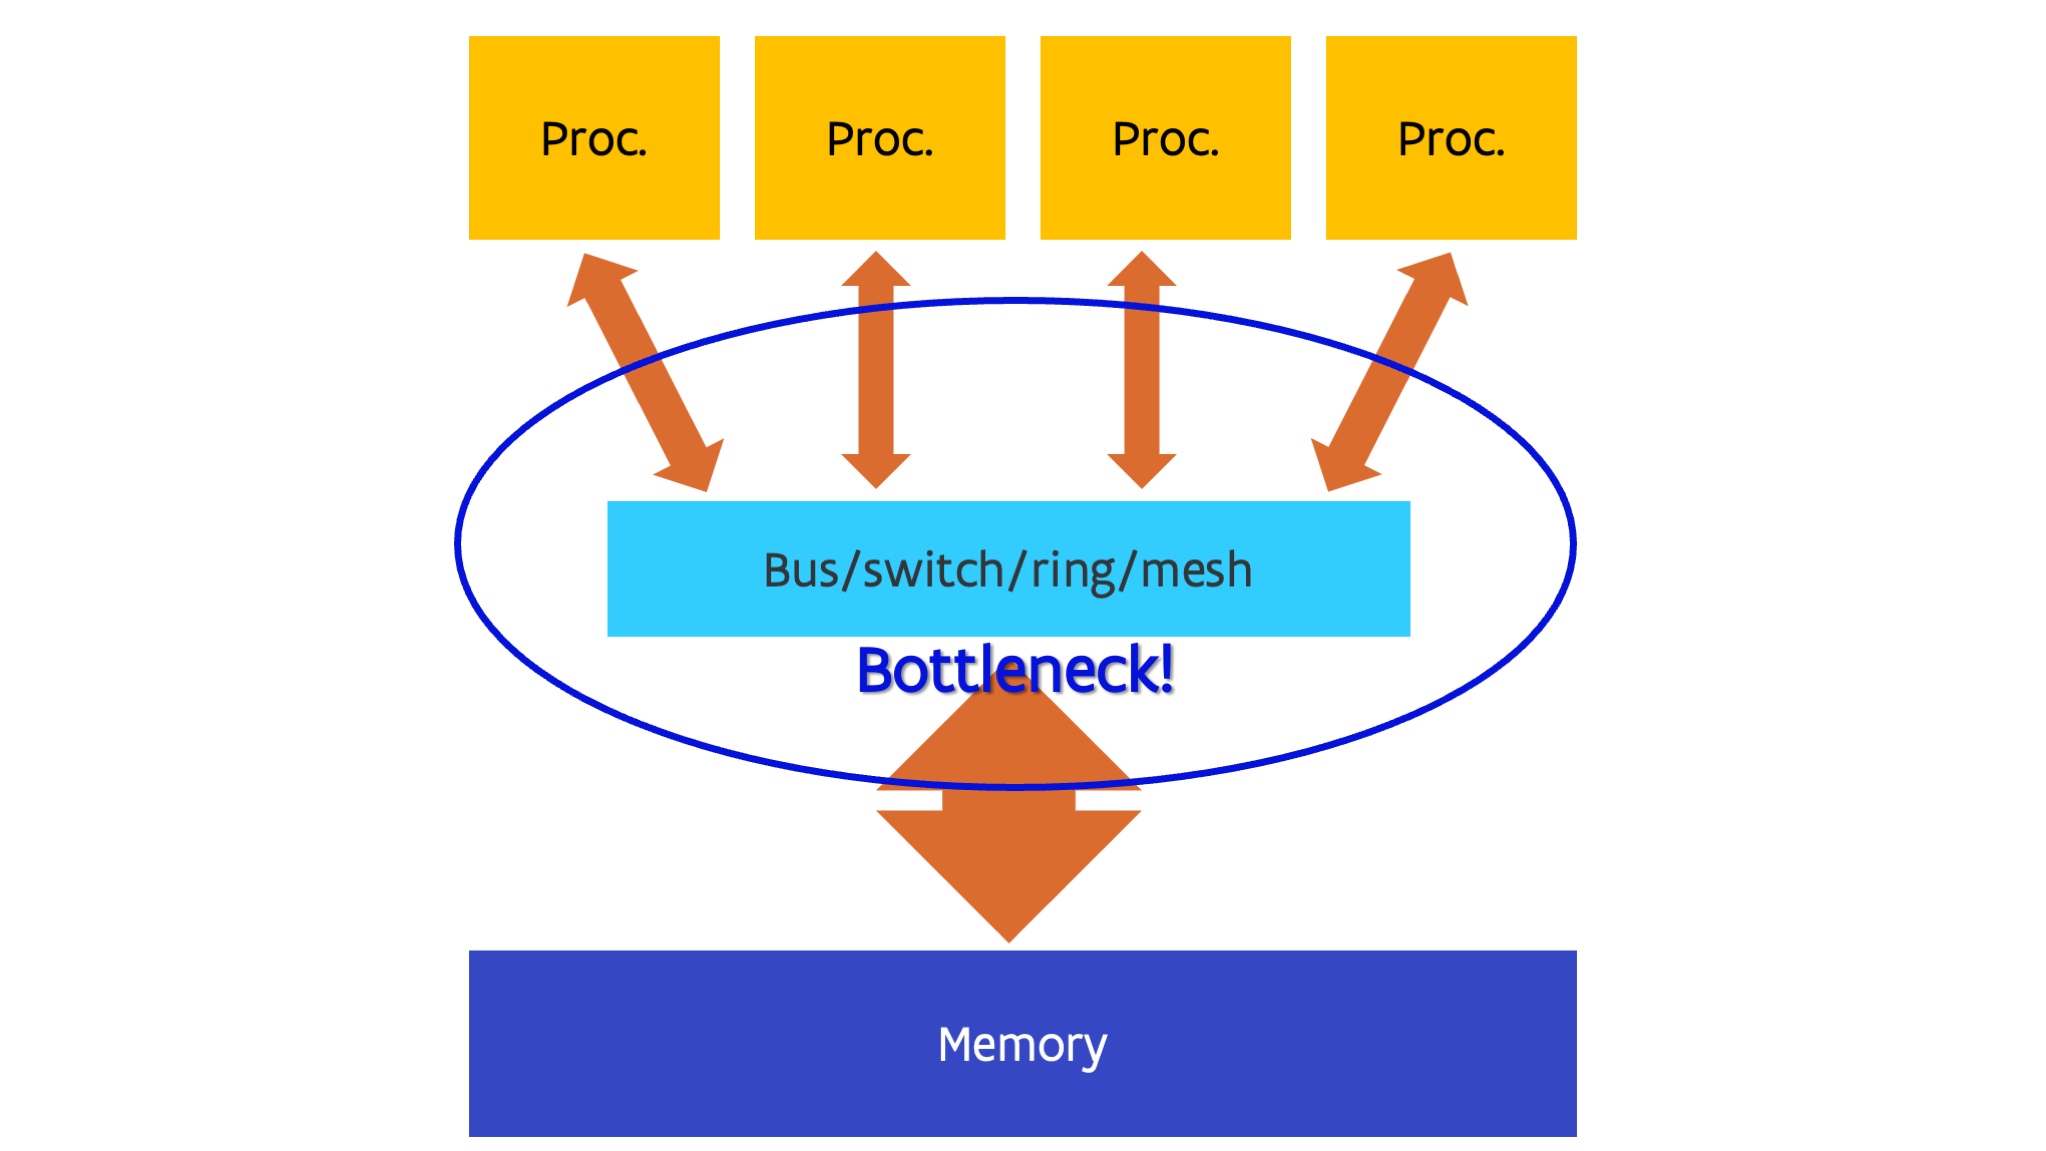 Symmetric multiprocessing and uniform memory access